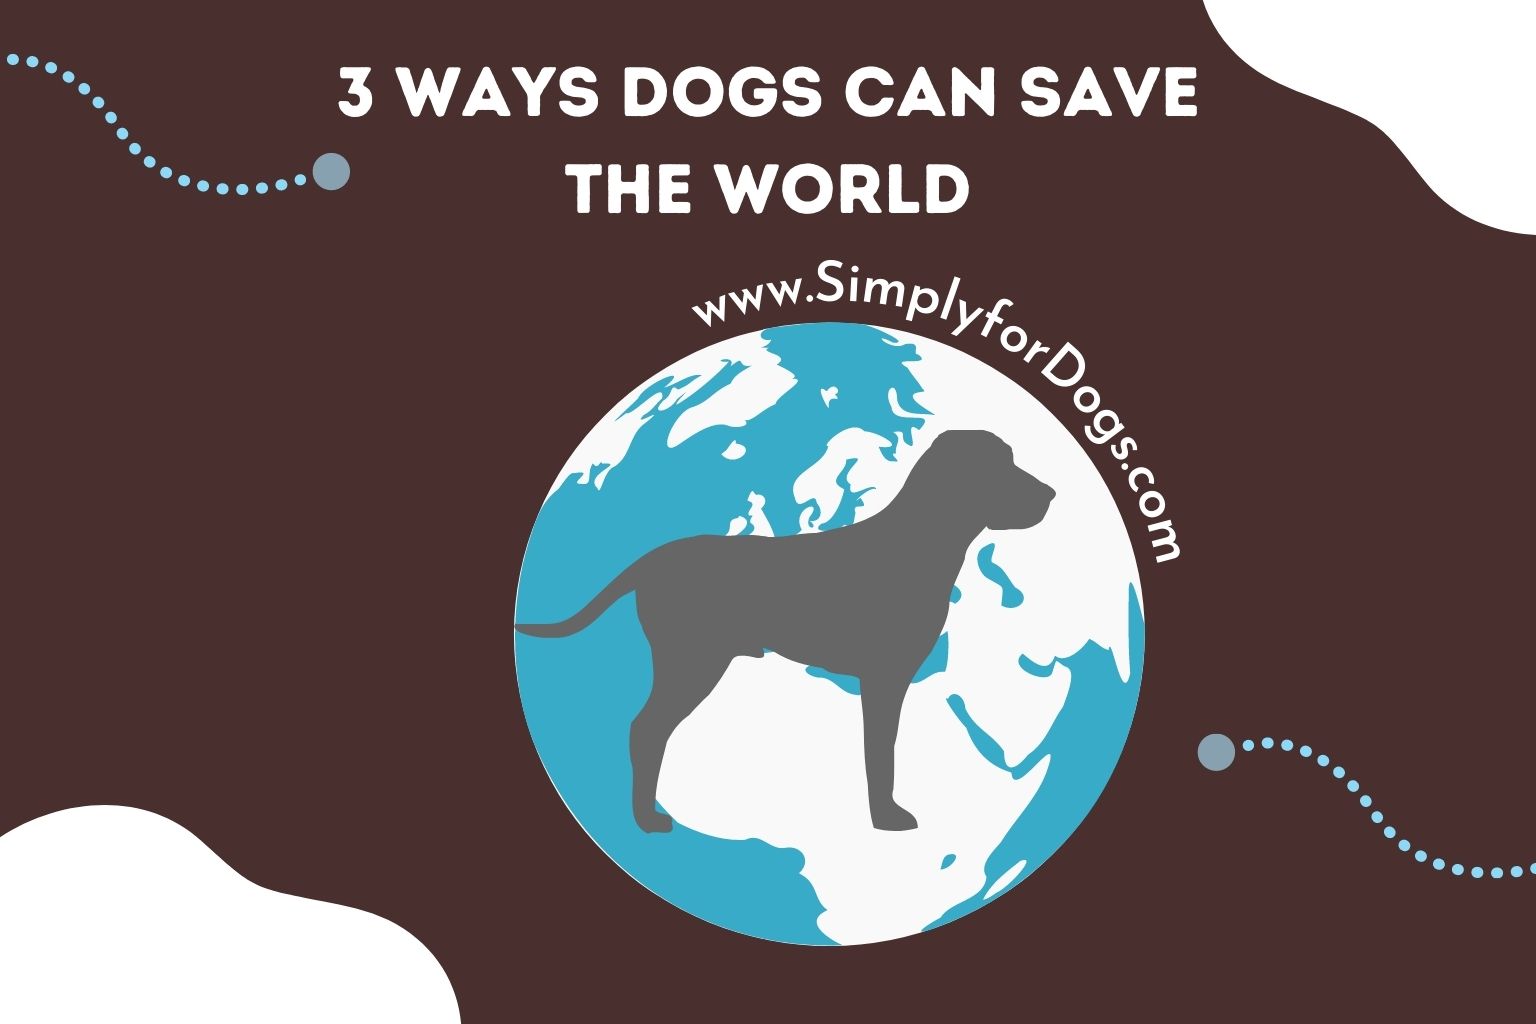 3 Ways Dogs Can Save the World